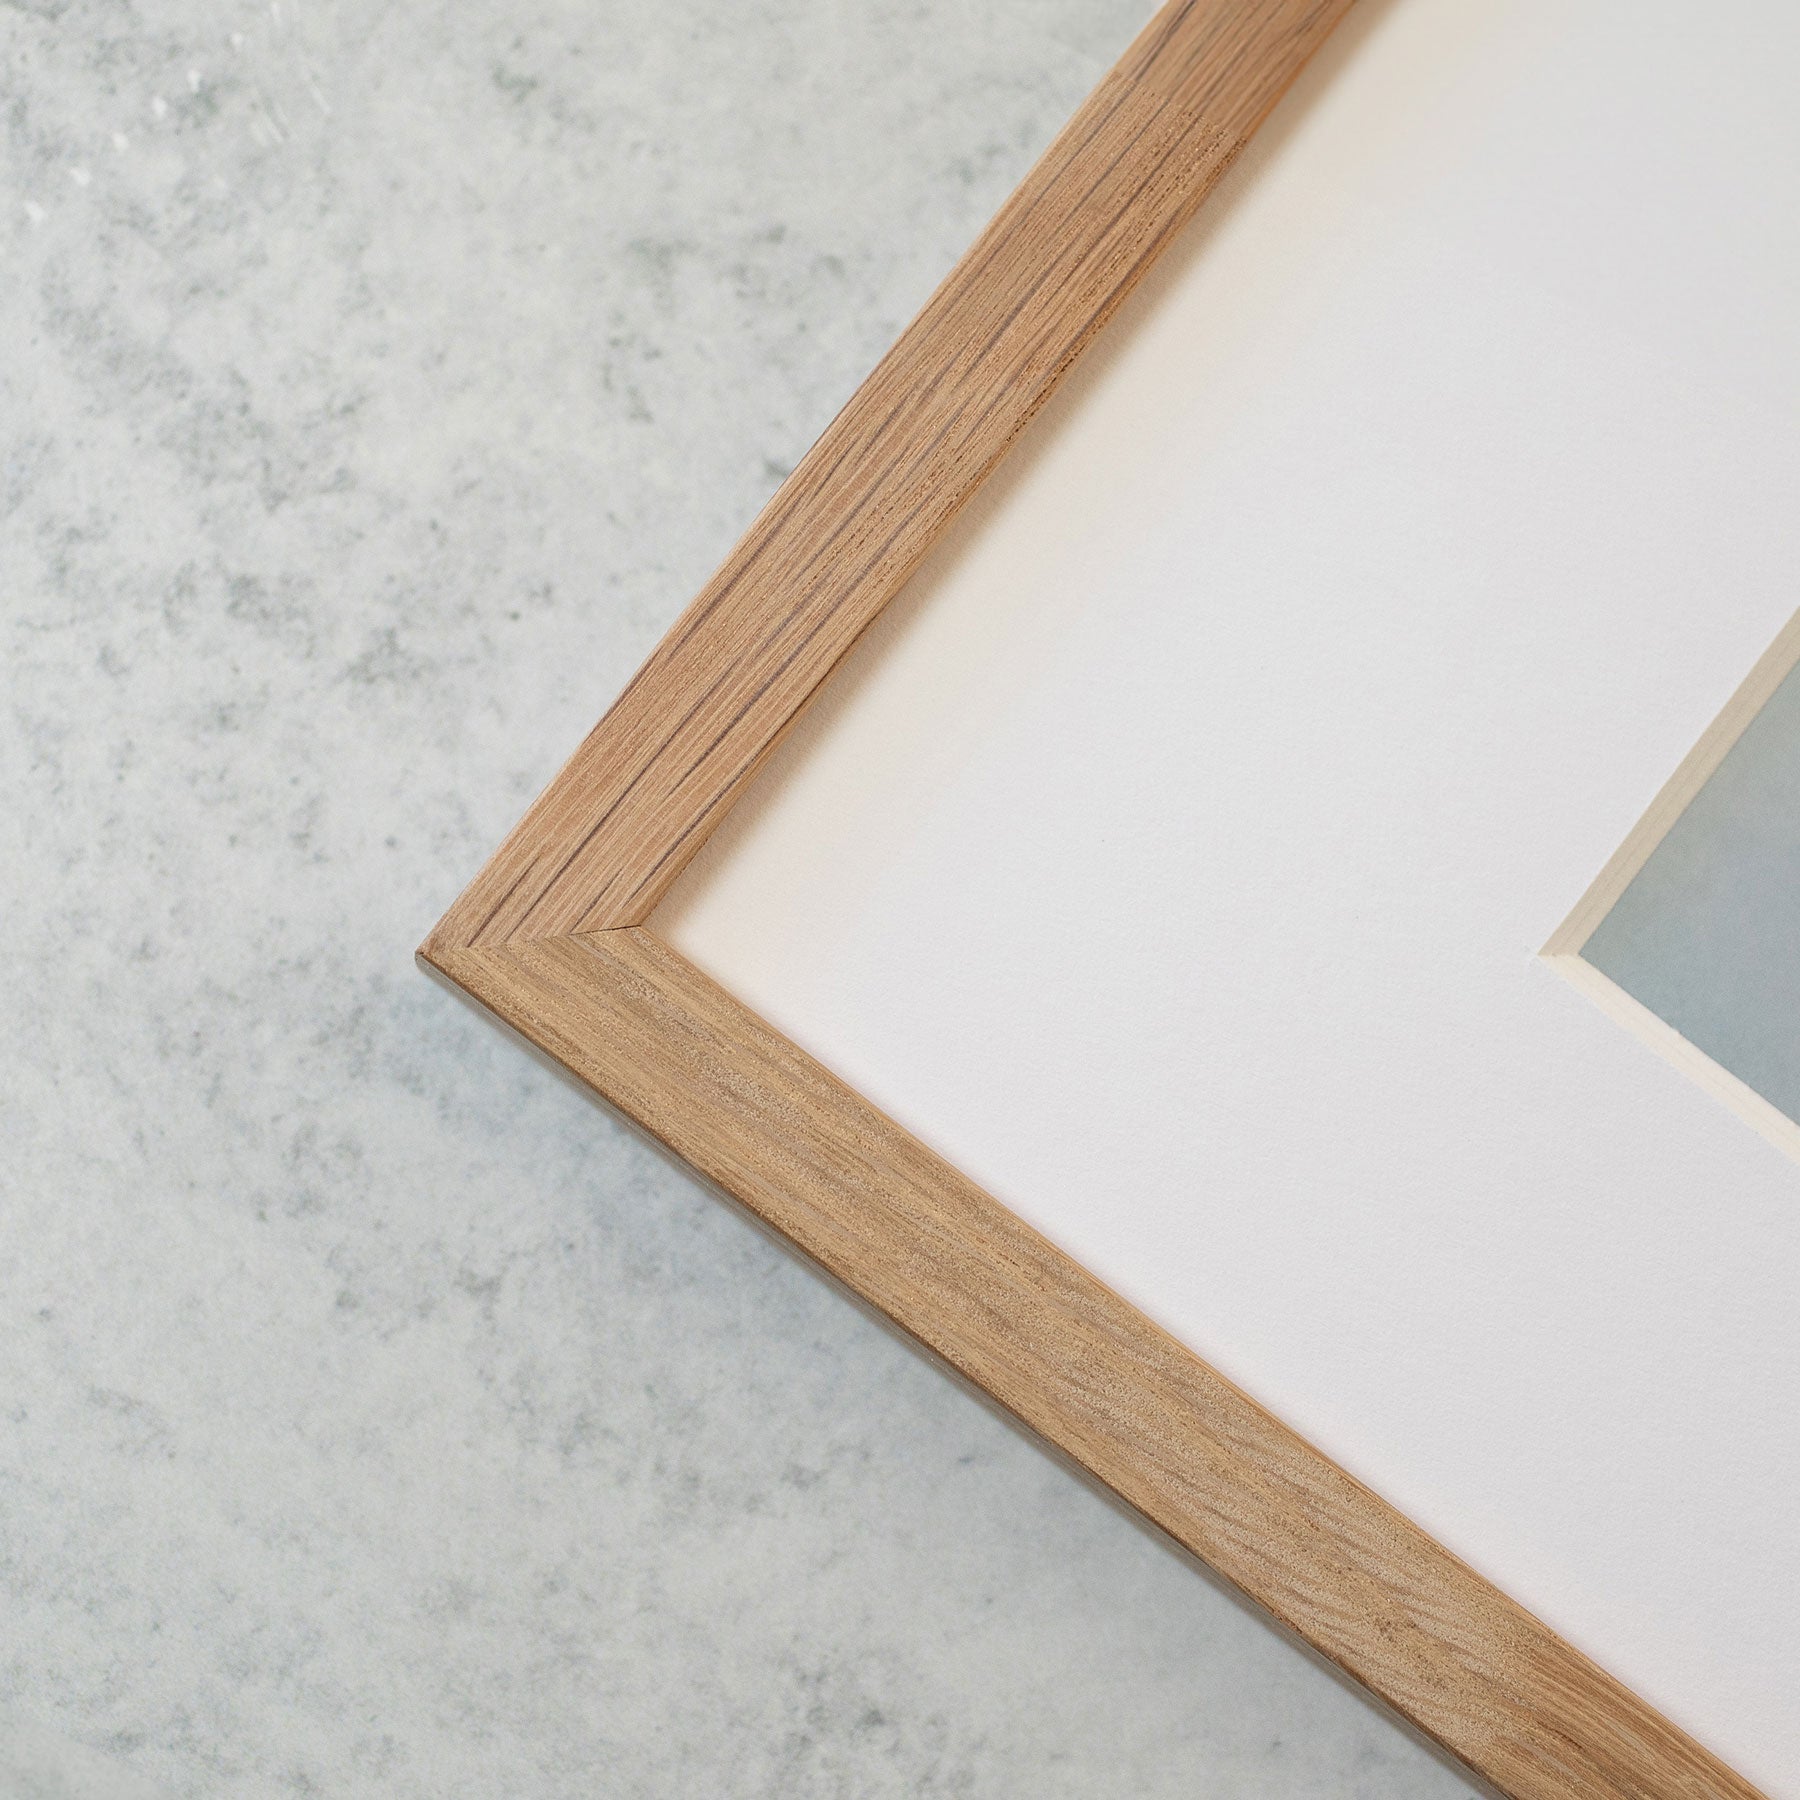 Close-up of a wooden Offley Green picture frame corner on a textured gray background, showing detail of the wood grain and part of the unframed Joshua Tree prints inside the frame.